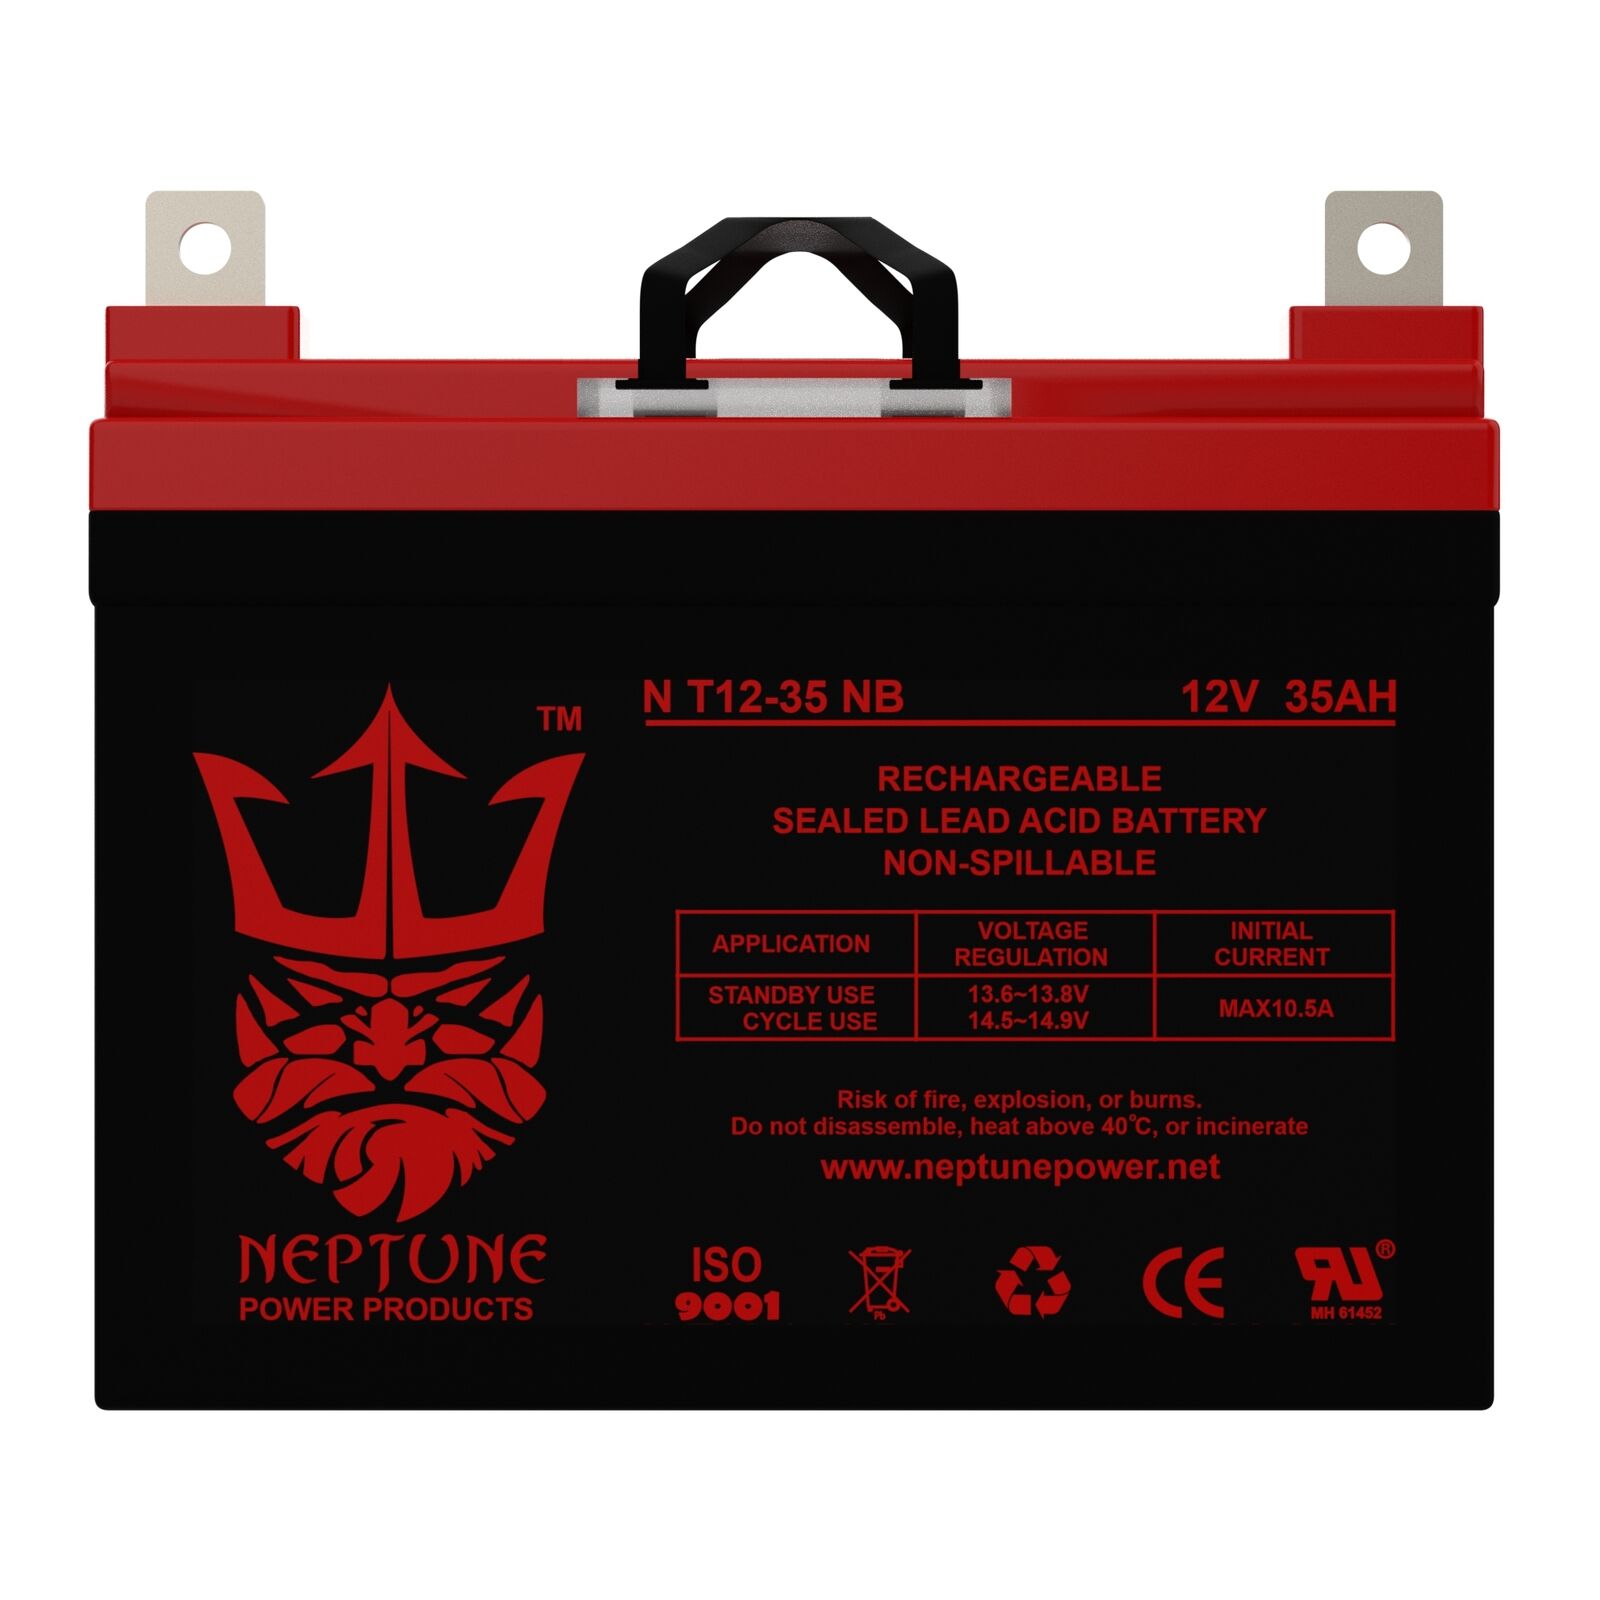 Speedex Tractor Co. 820 12V 35Ah SLA Replacement Lawn mower Battery by Neptune